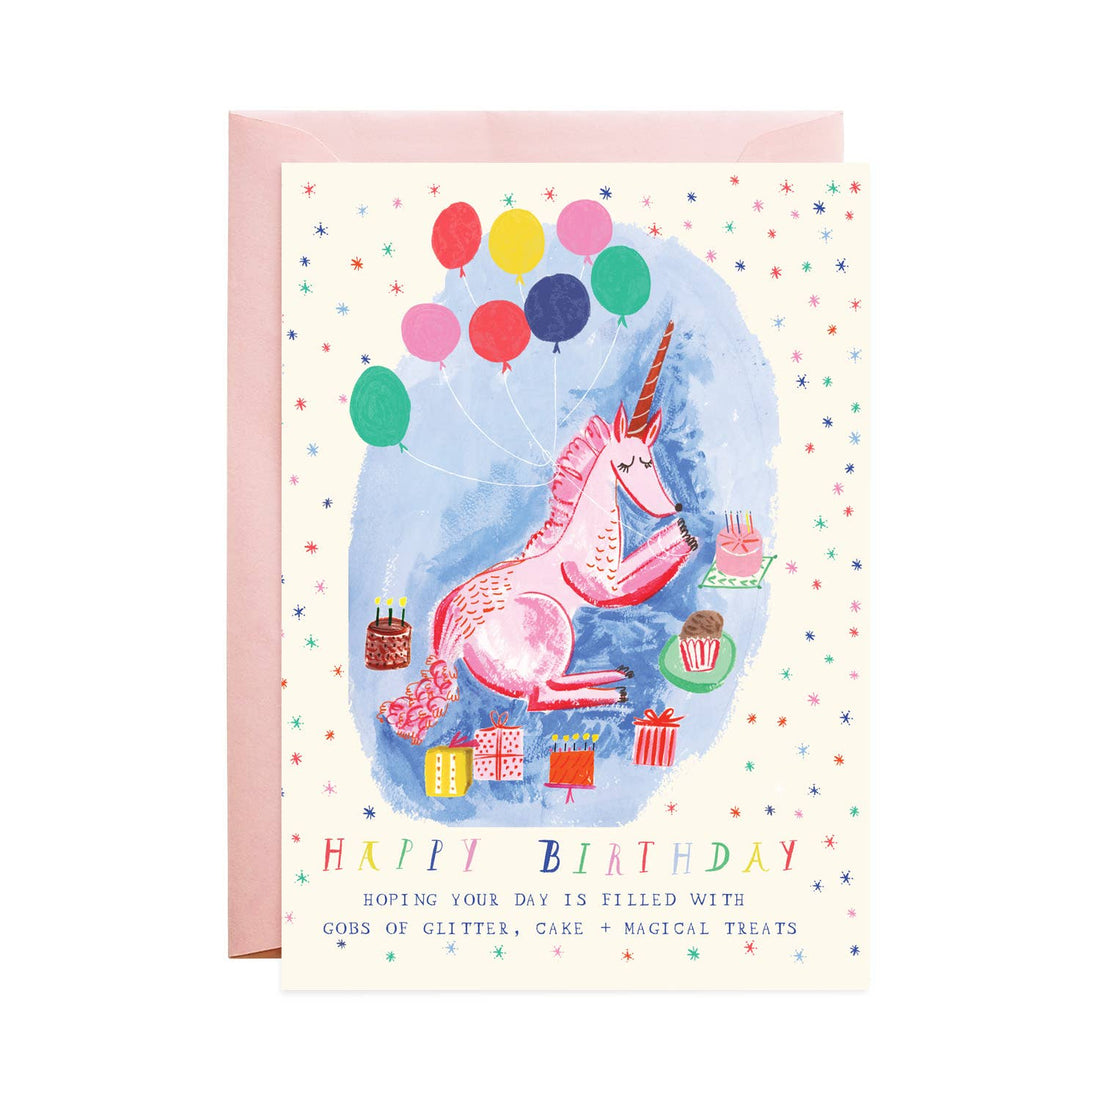 A Most Magical Birthday - Greeting Card